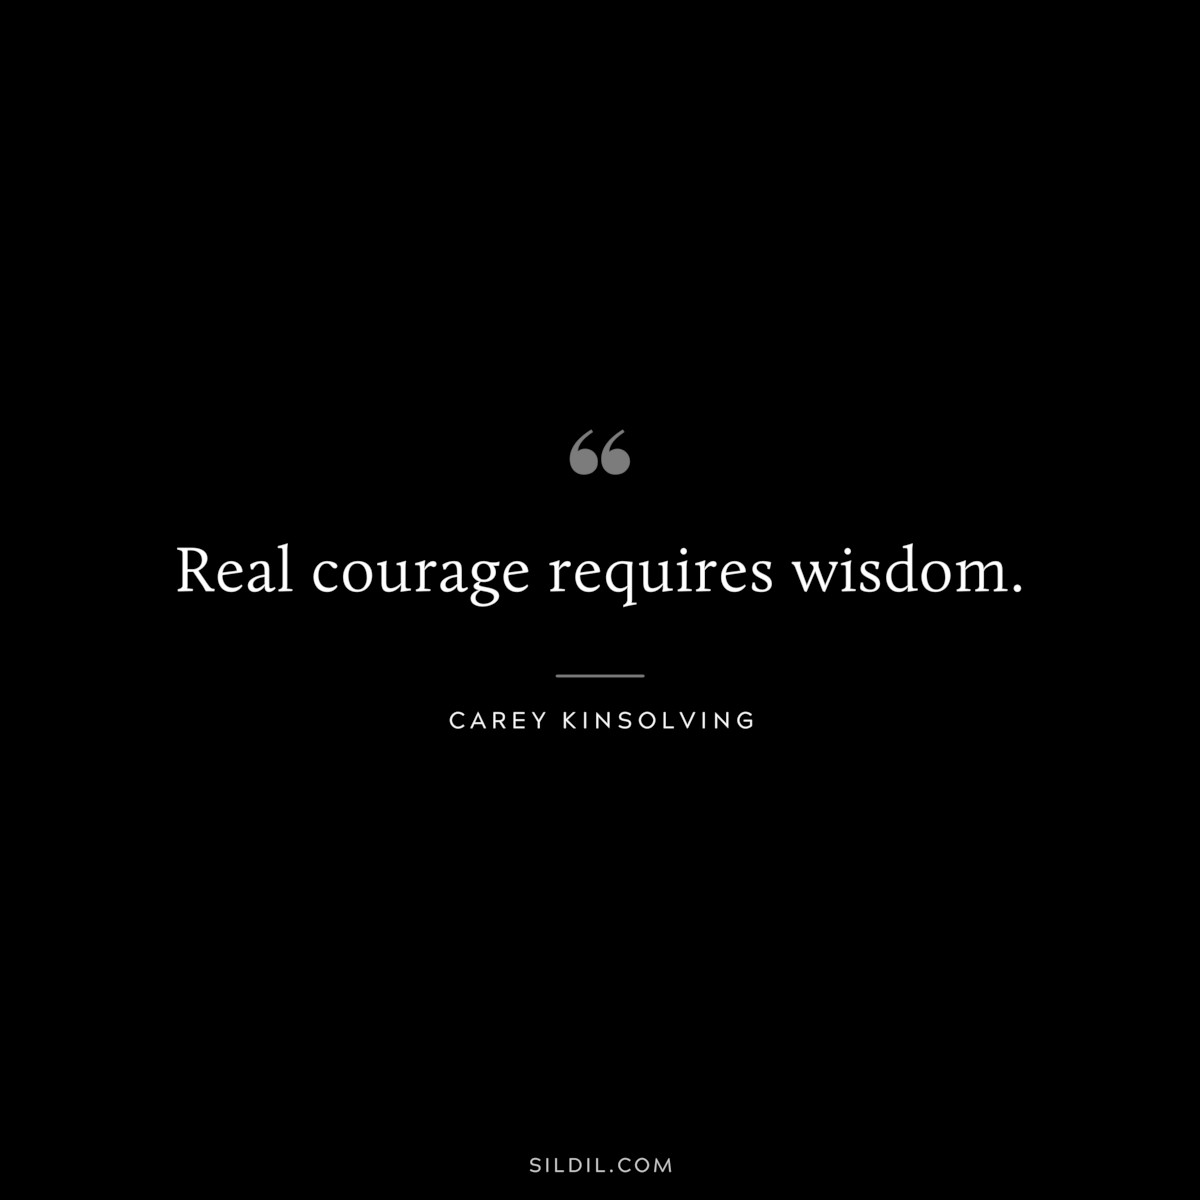 Real courage requires wisdom. ― Carey Kinsolving